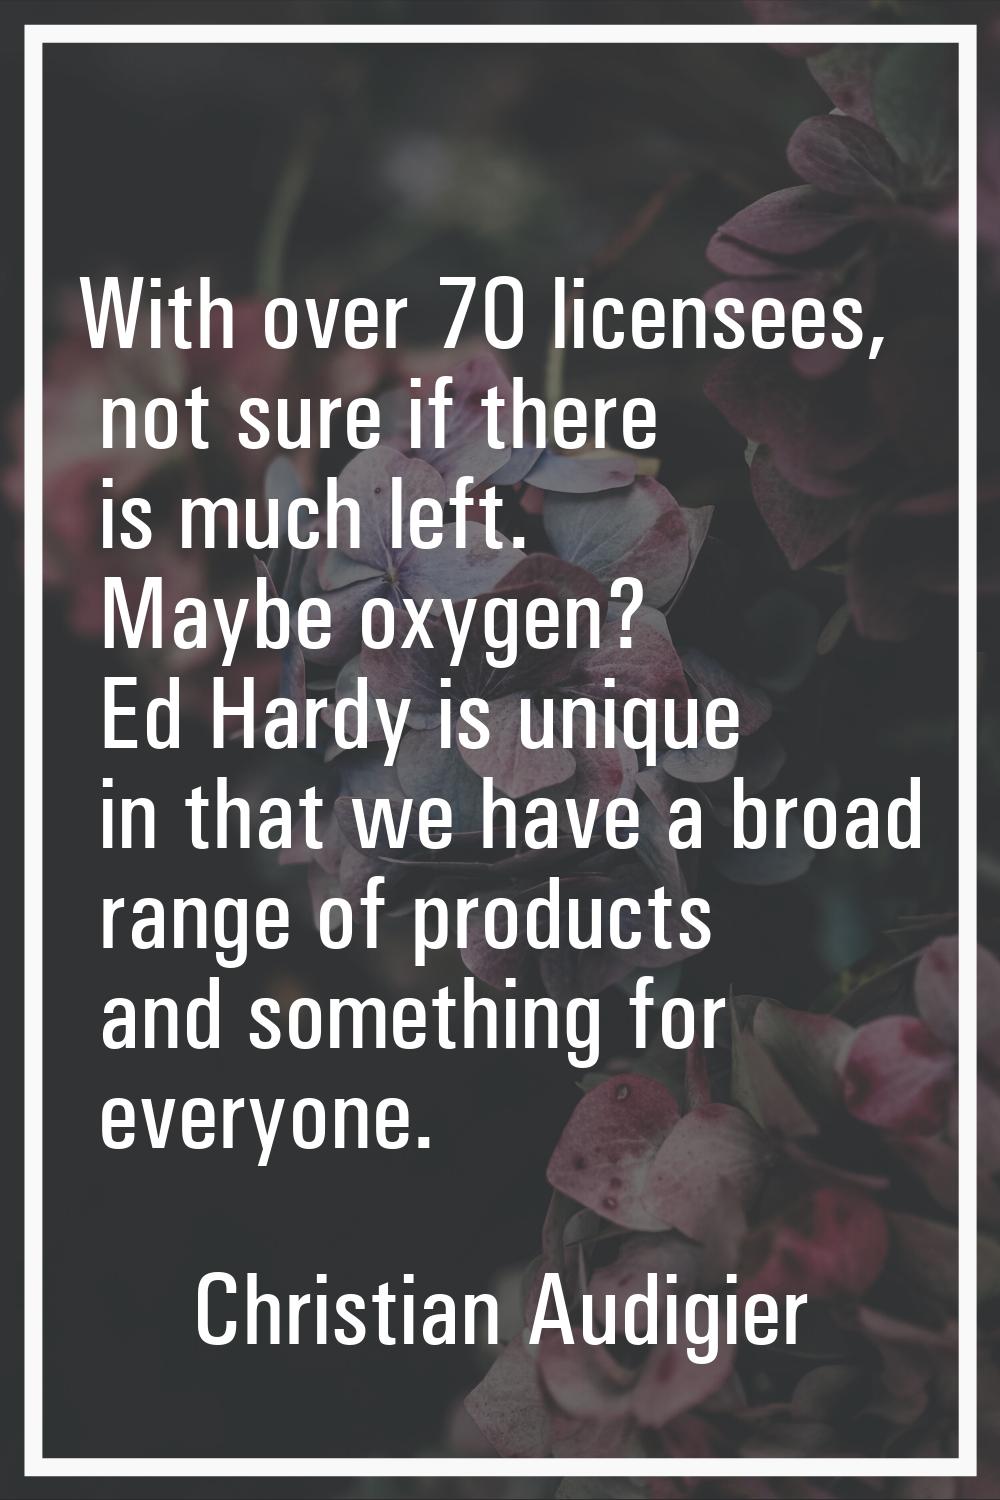 With over 70 licensees, not sure if there is much left. Maybe oxygen? Ed Hardy is unique in that we